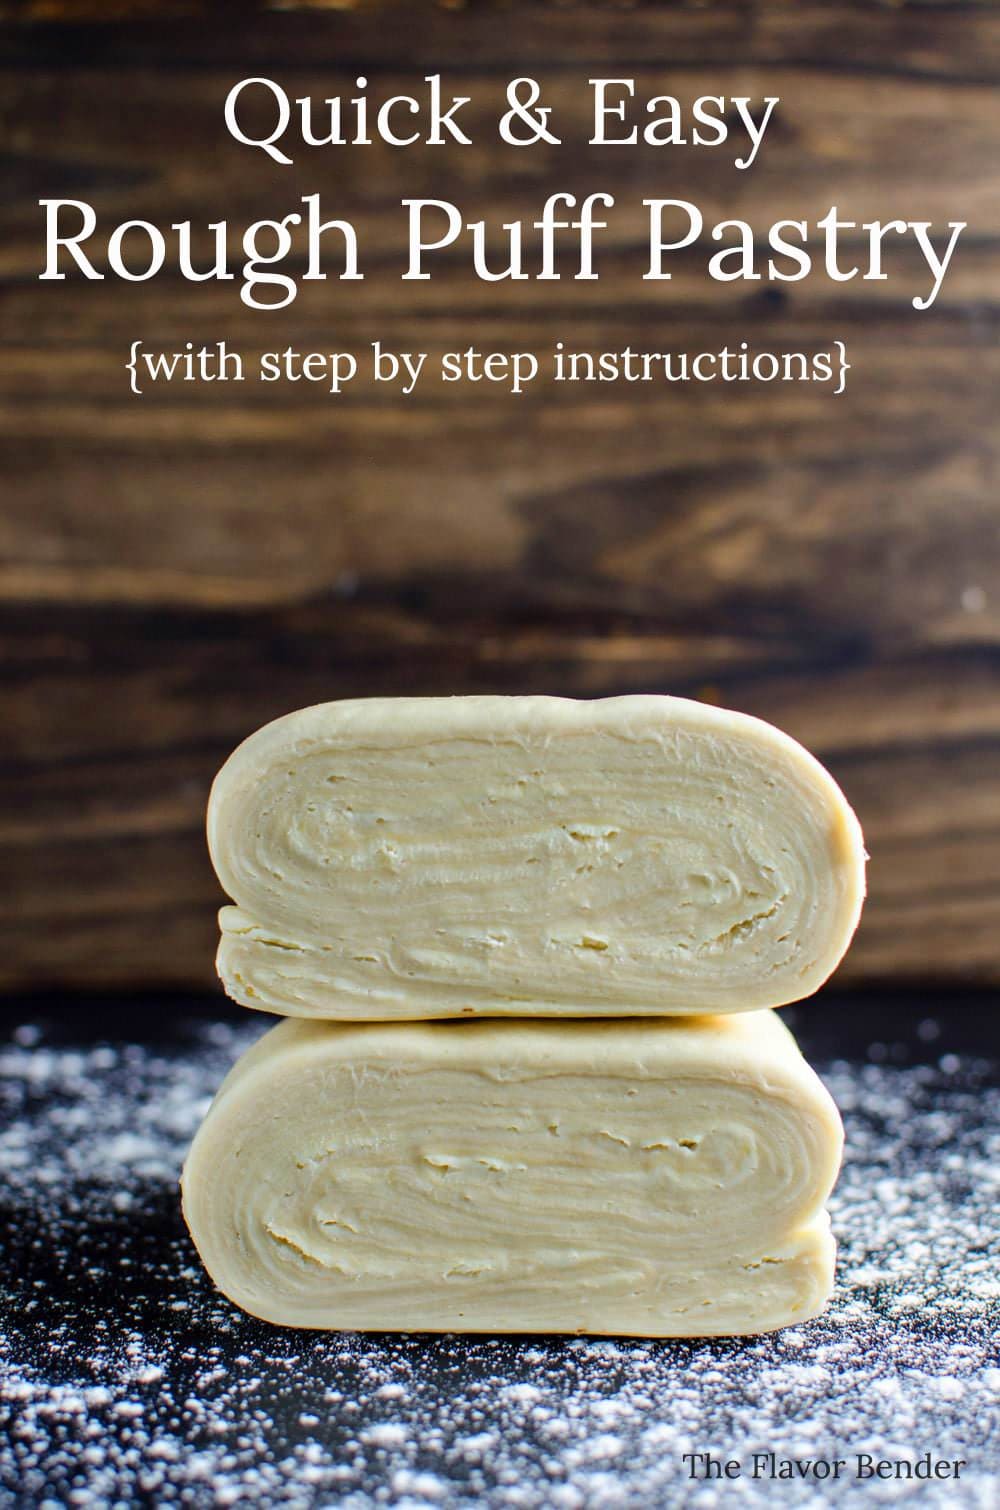 Quick and Easy Rough Puff Pastry